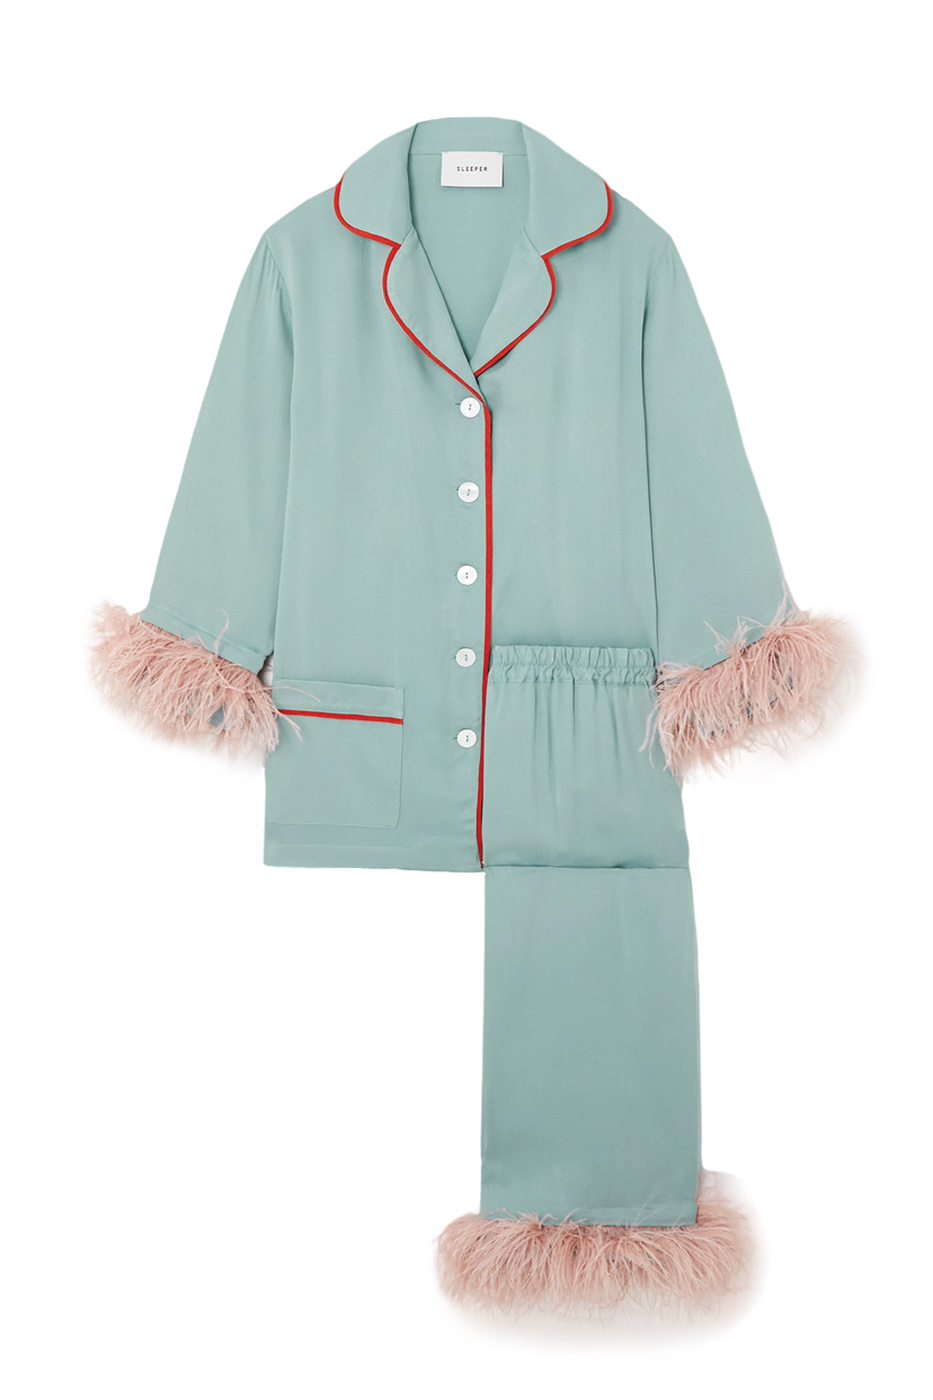 32 Sleeper, Party Feather Trimmed Twill Pajama Set, Net A Porter.com